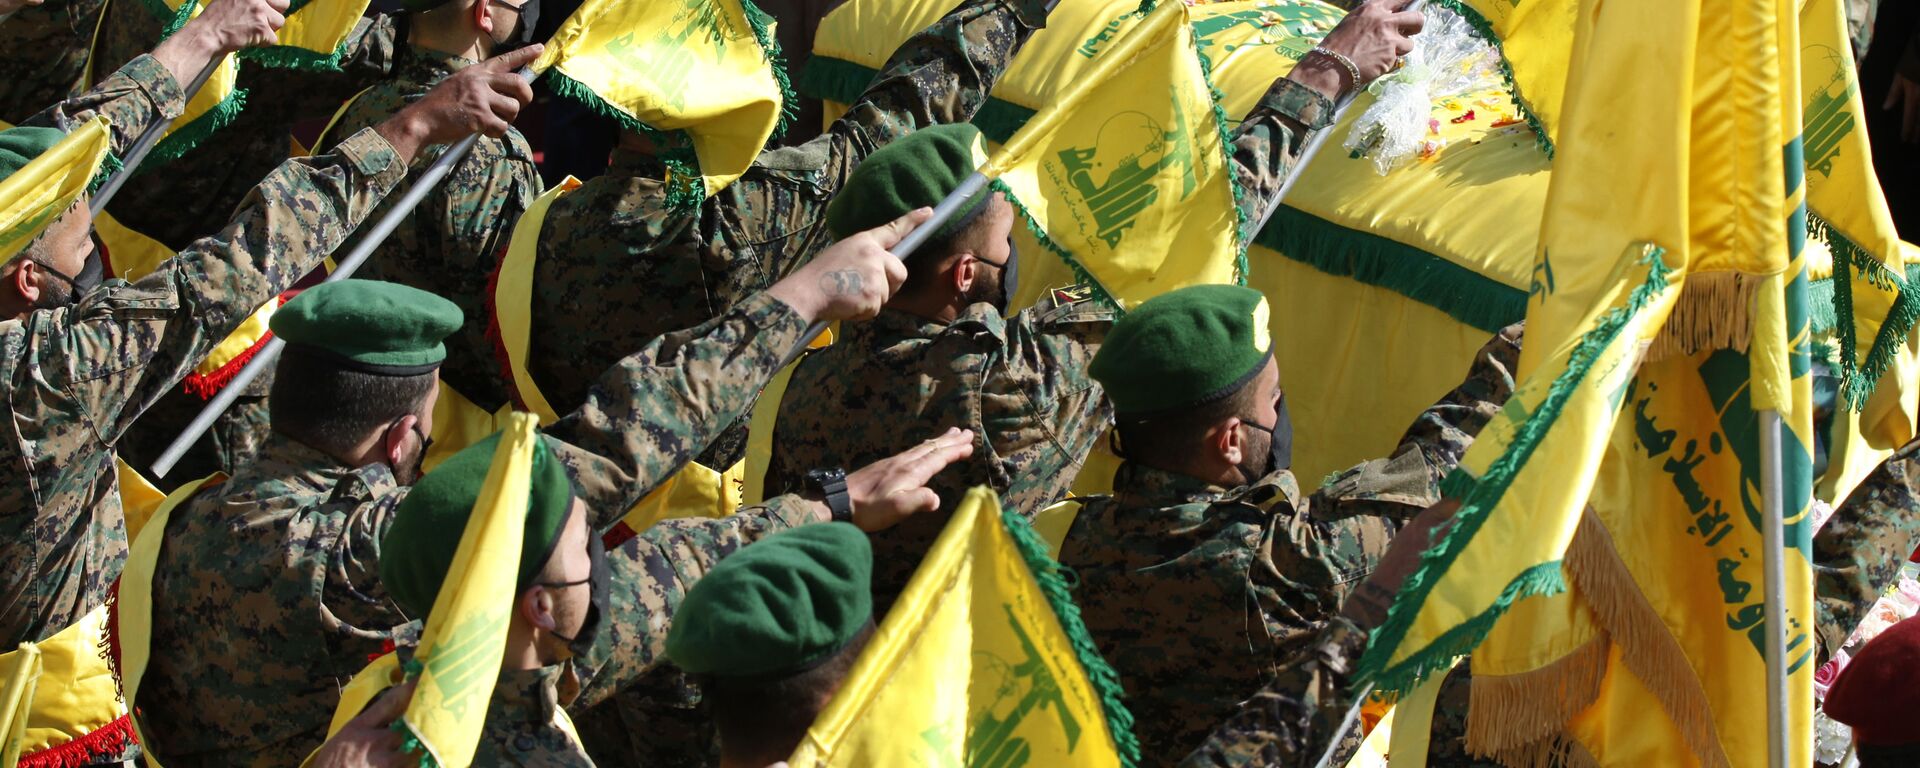 Hezbollah fighters raise their group flags, as they salut the coffin of their comrade Mohammed Tahhan who was shot dead on Friday by Israeli forces along the Lebanon-Israel border, during his funeral procession, in the southern village of Adloun, Lebanon, Saturday, May 15, 2021 - Sputnik International, 1920, 07.08.2022